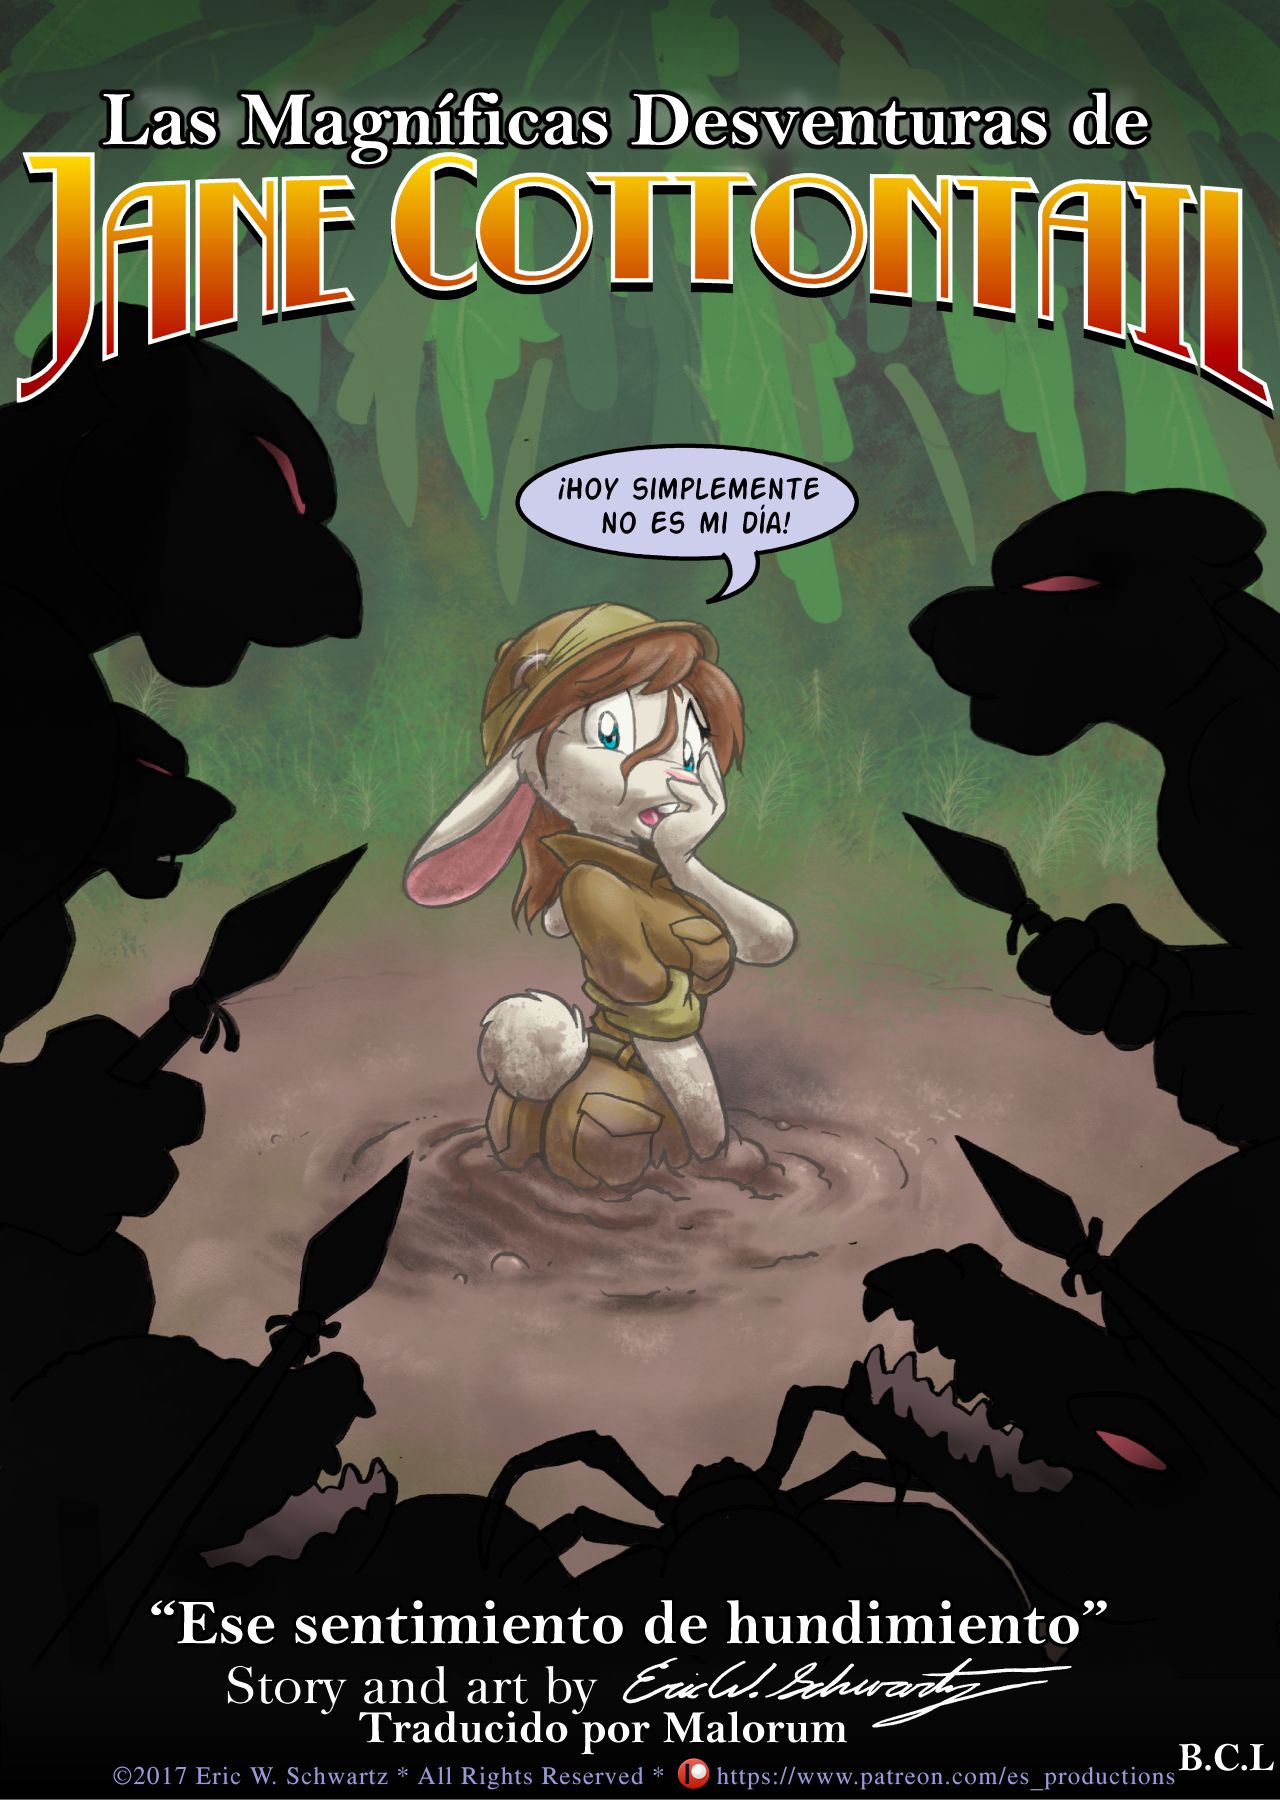 The Misadventures of Jane Cottontail Chapter 01 Las Magníficas Desventuras de Jane Cottontail Capítulo 01